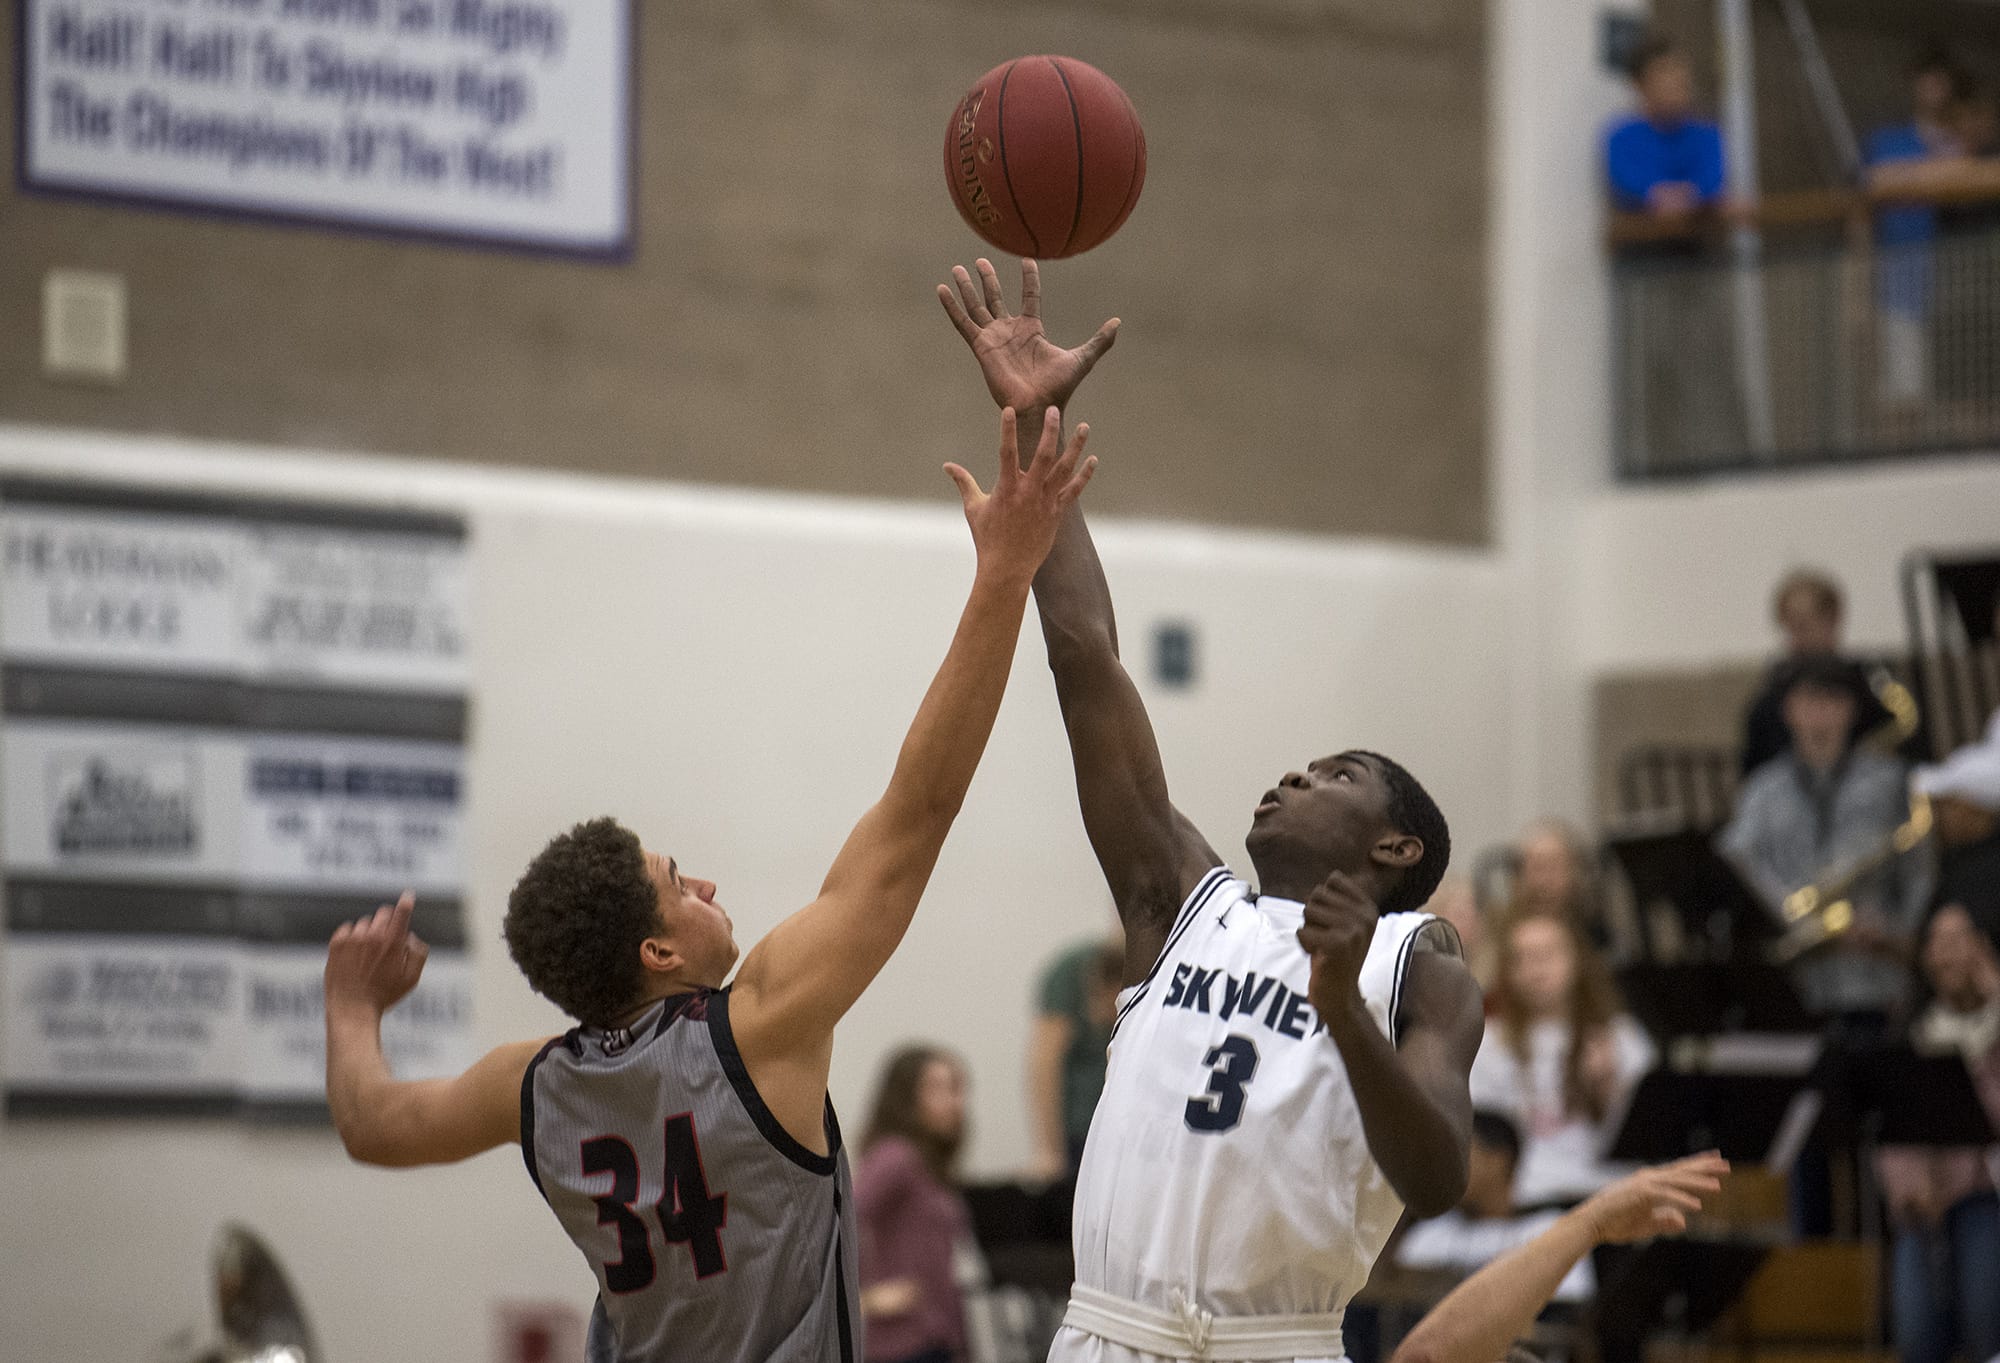 Union's Jason Franklin Jr (34) and Skyview's Samaad Hector (3) face off at tipoff, Hector gaining possession for Skyview, at the start of Friday night's game at Skyview High School in Vancouver on Jan. 5, 2018. Skyview defeated Union 59-55.